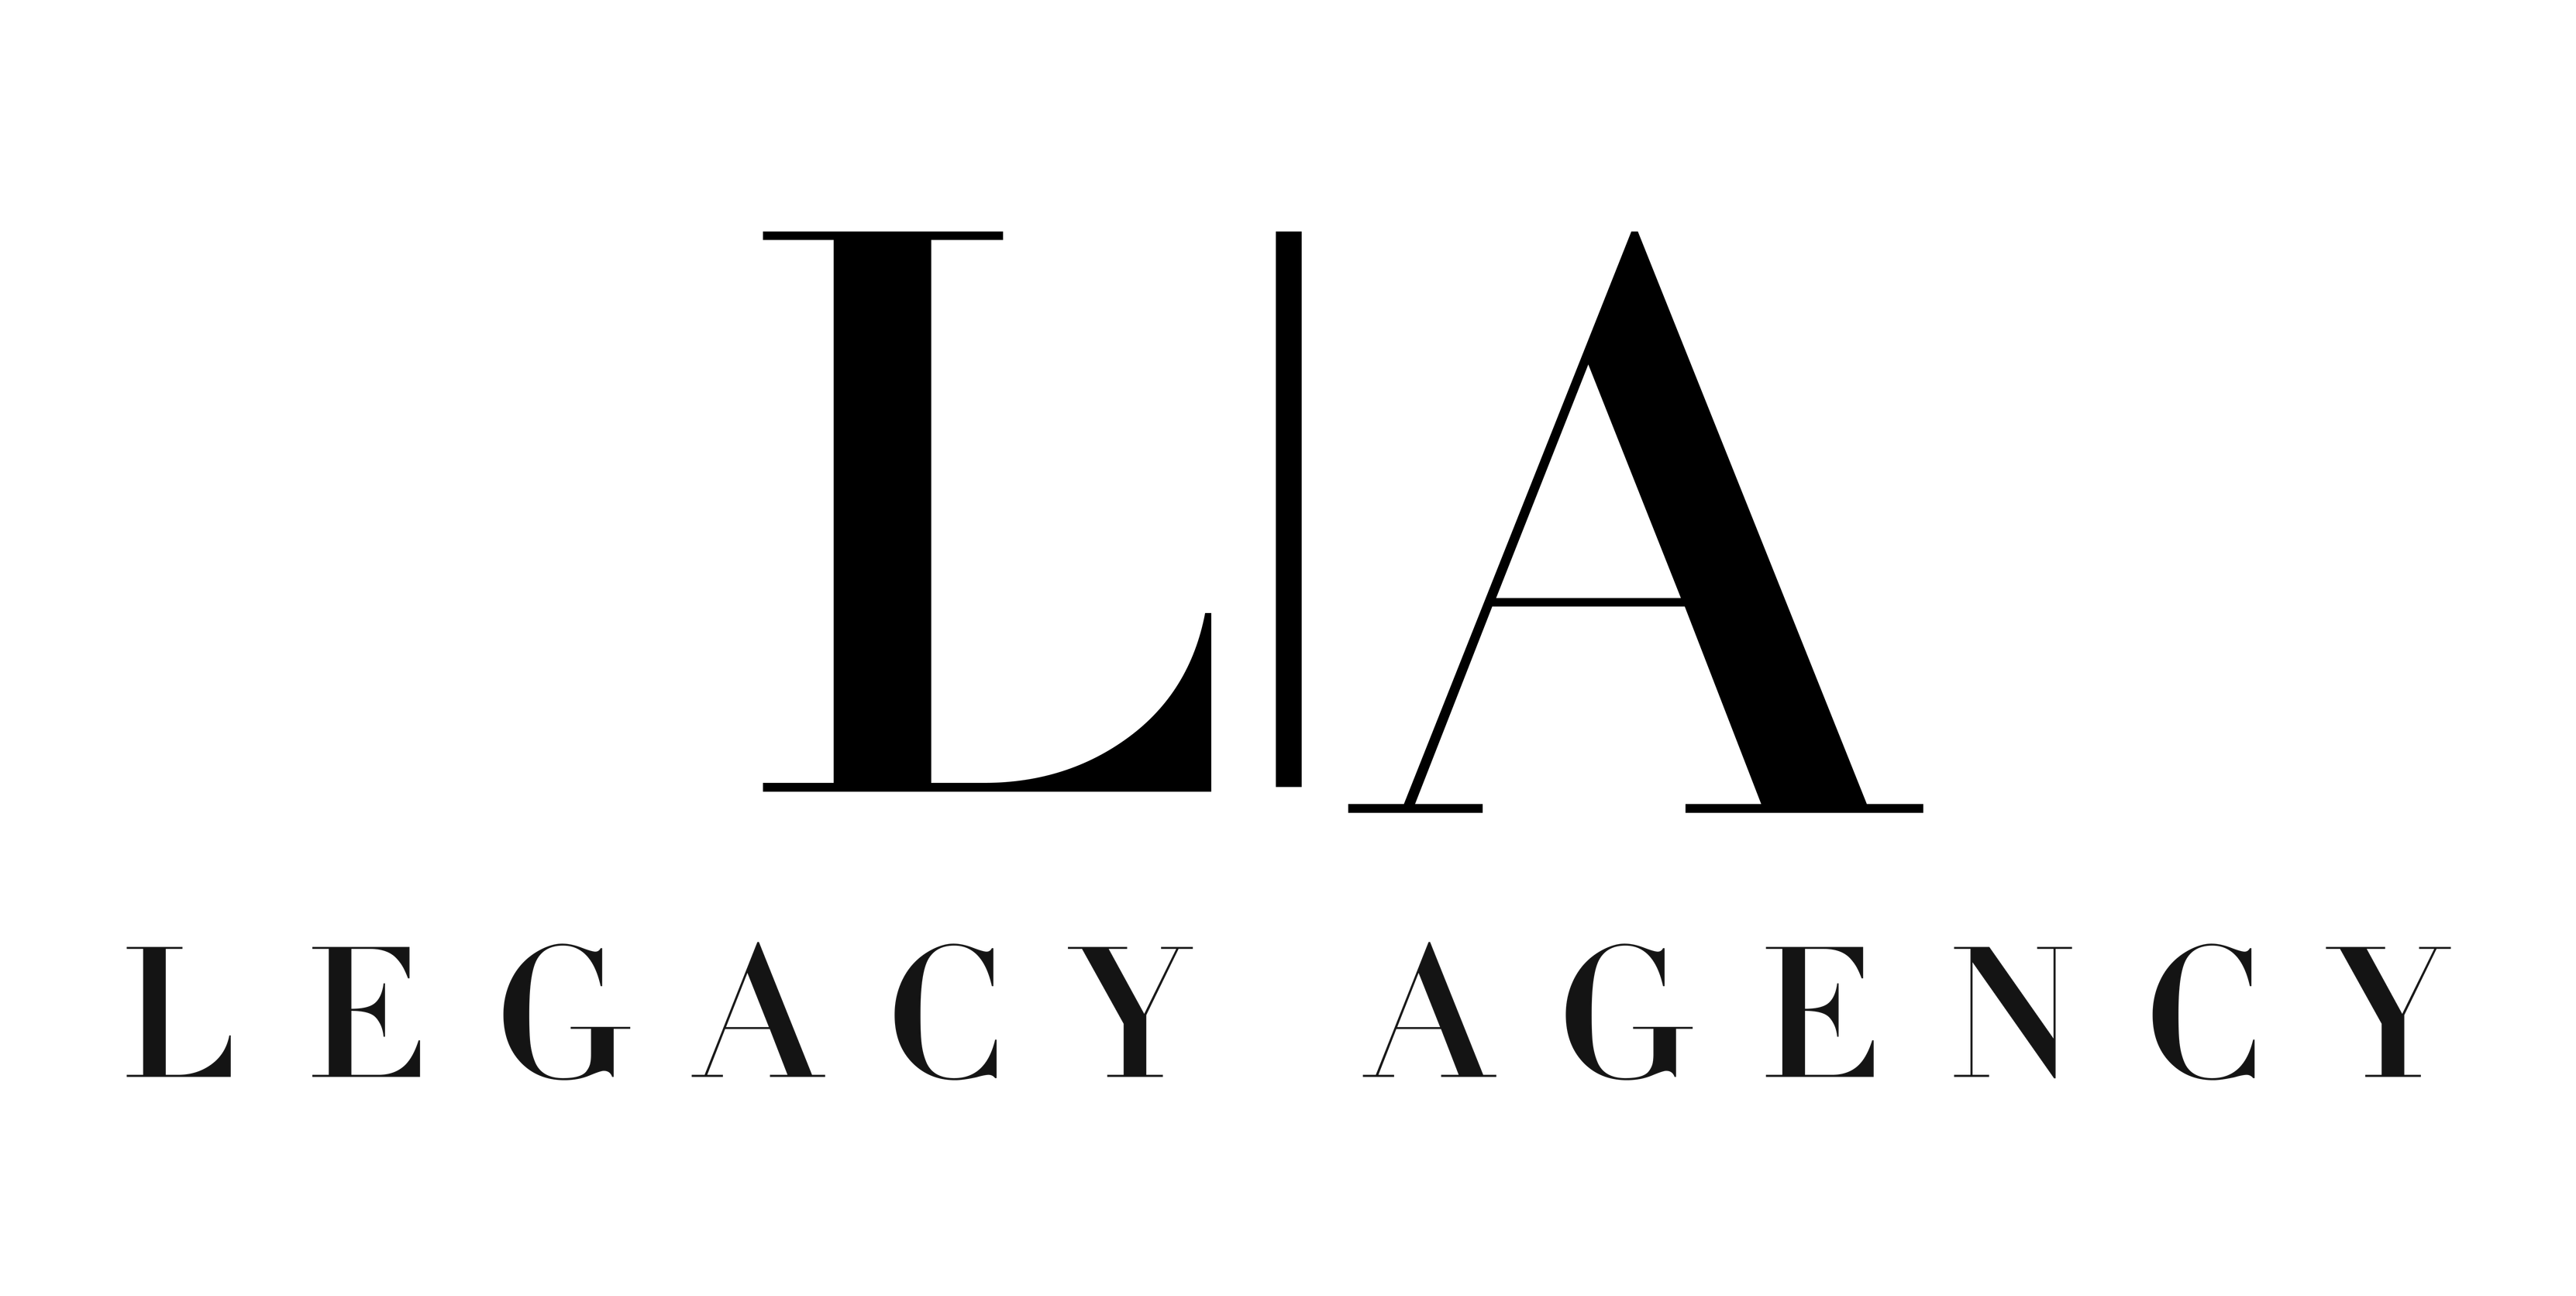 The logo or business face of "Legacy Agency LLC"